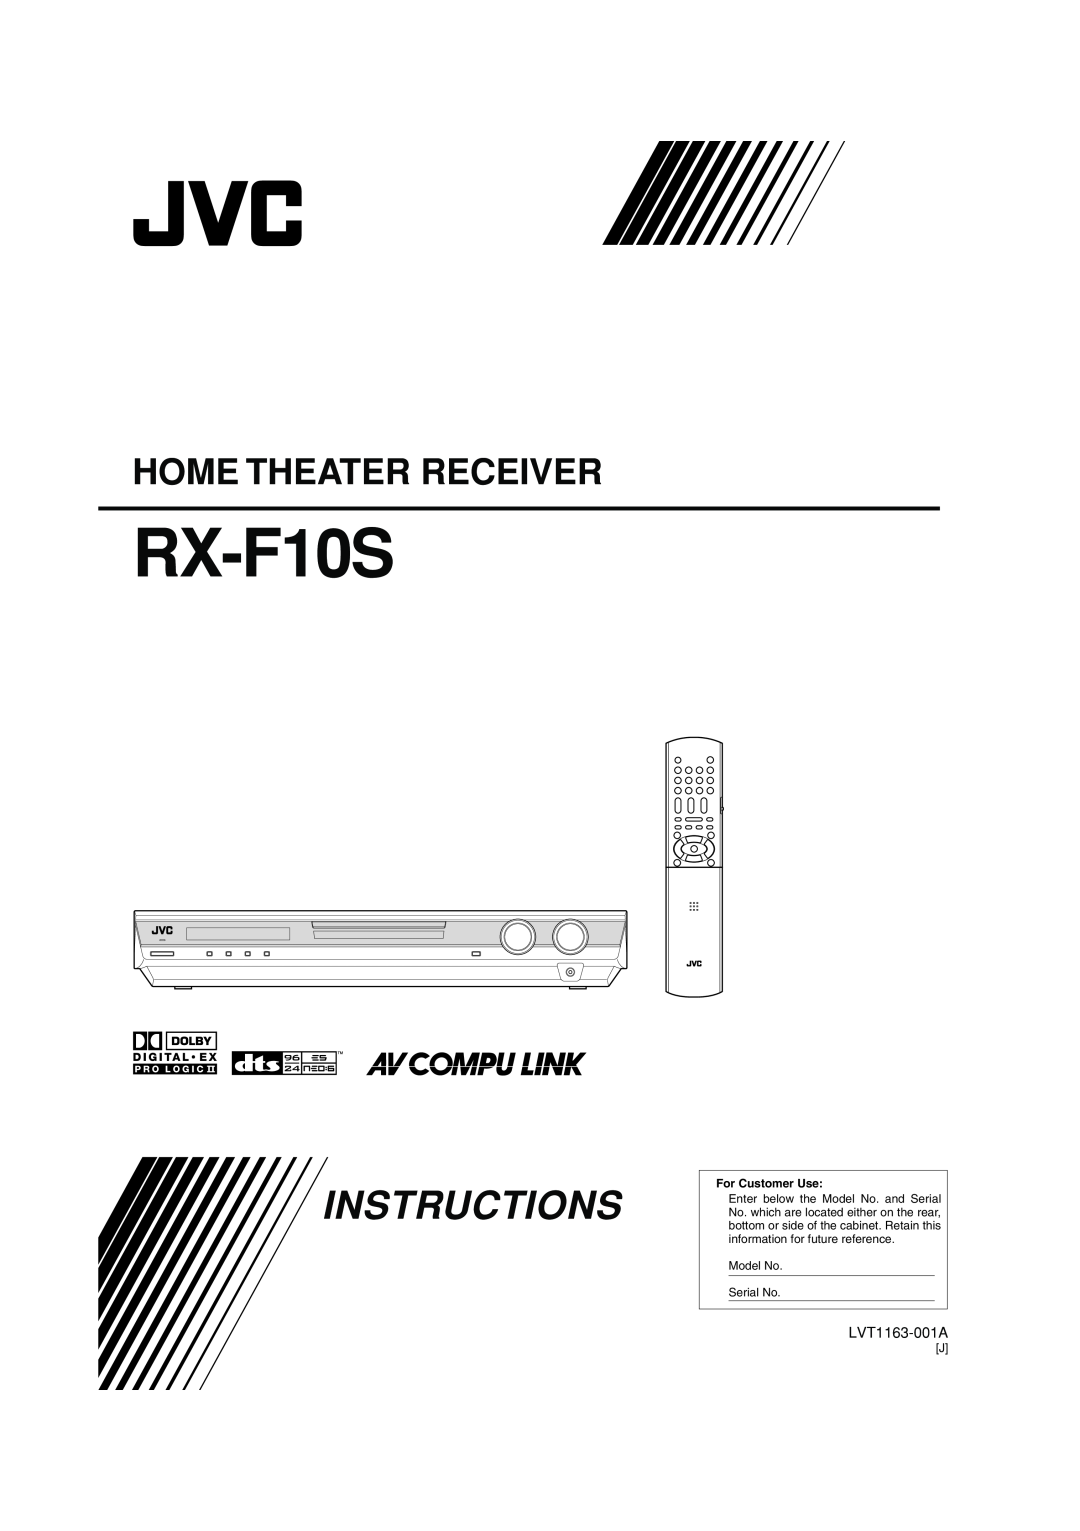 JVC RX-F10S manual Instructions, Home Theater Receiver 